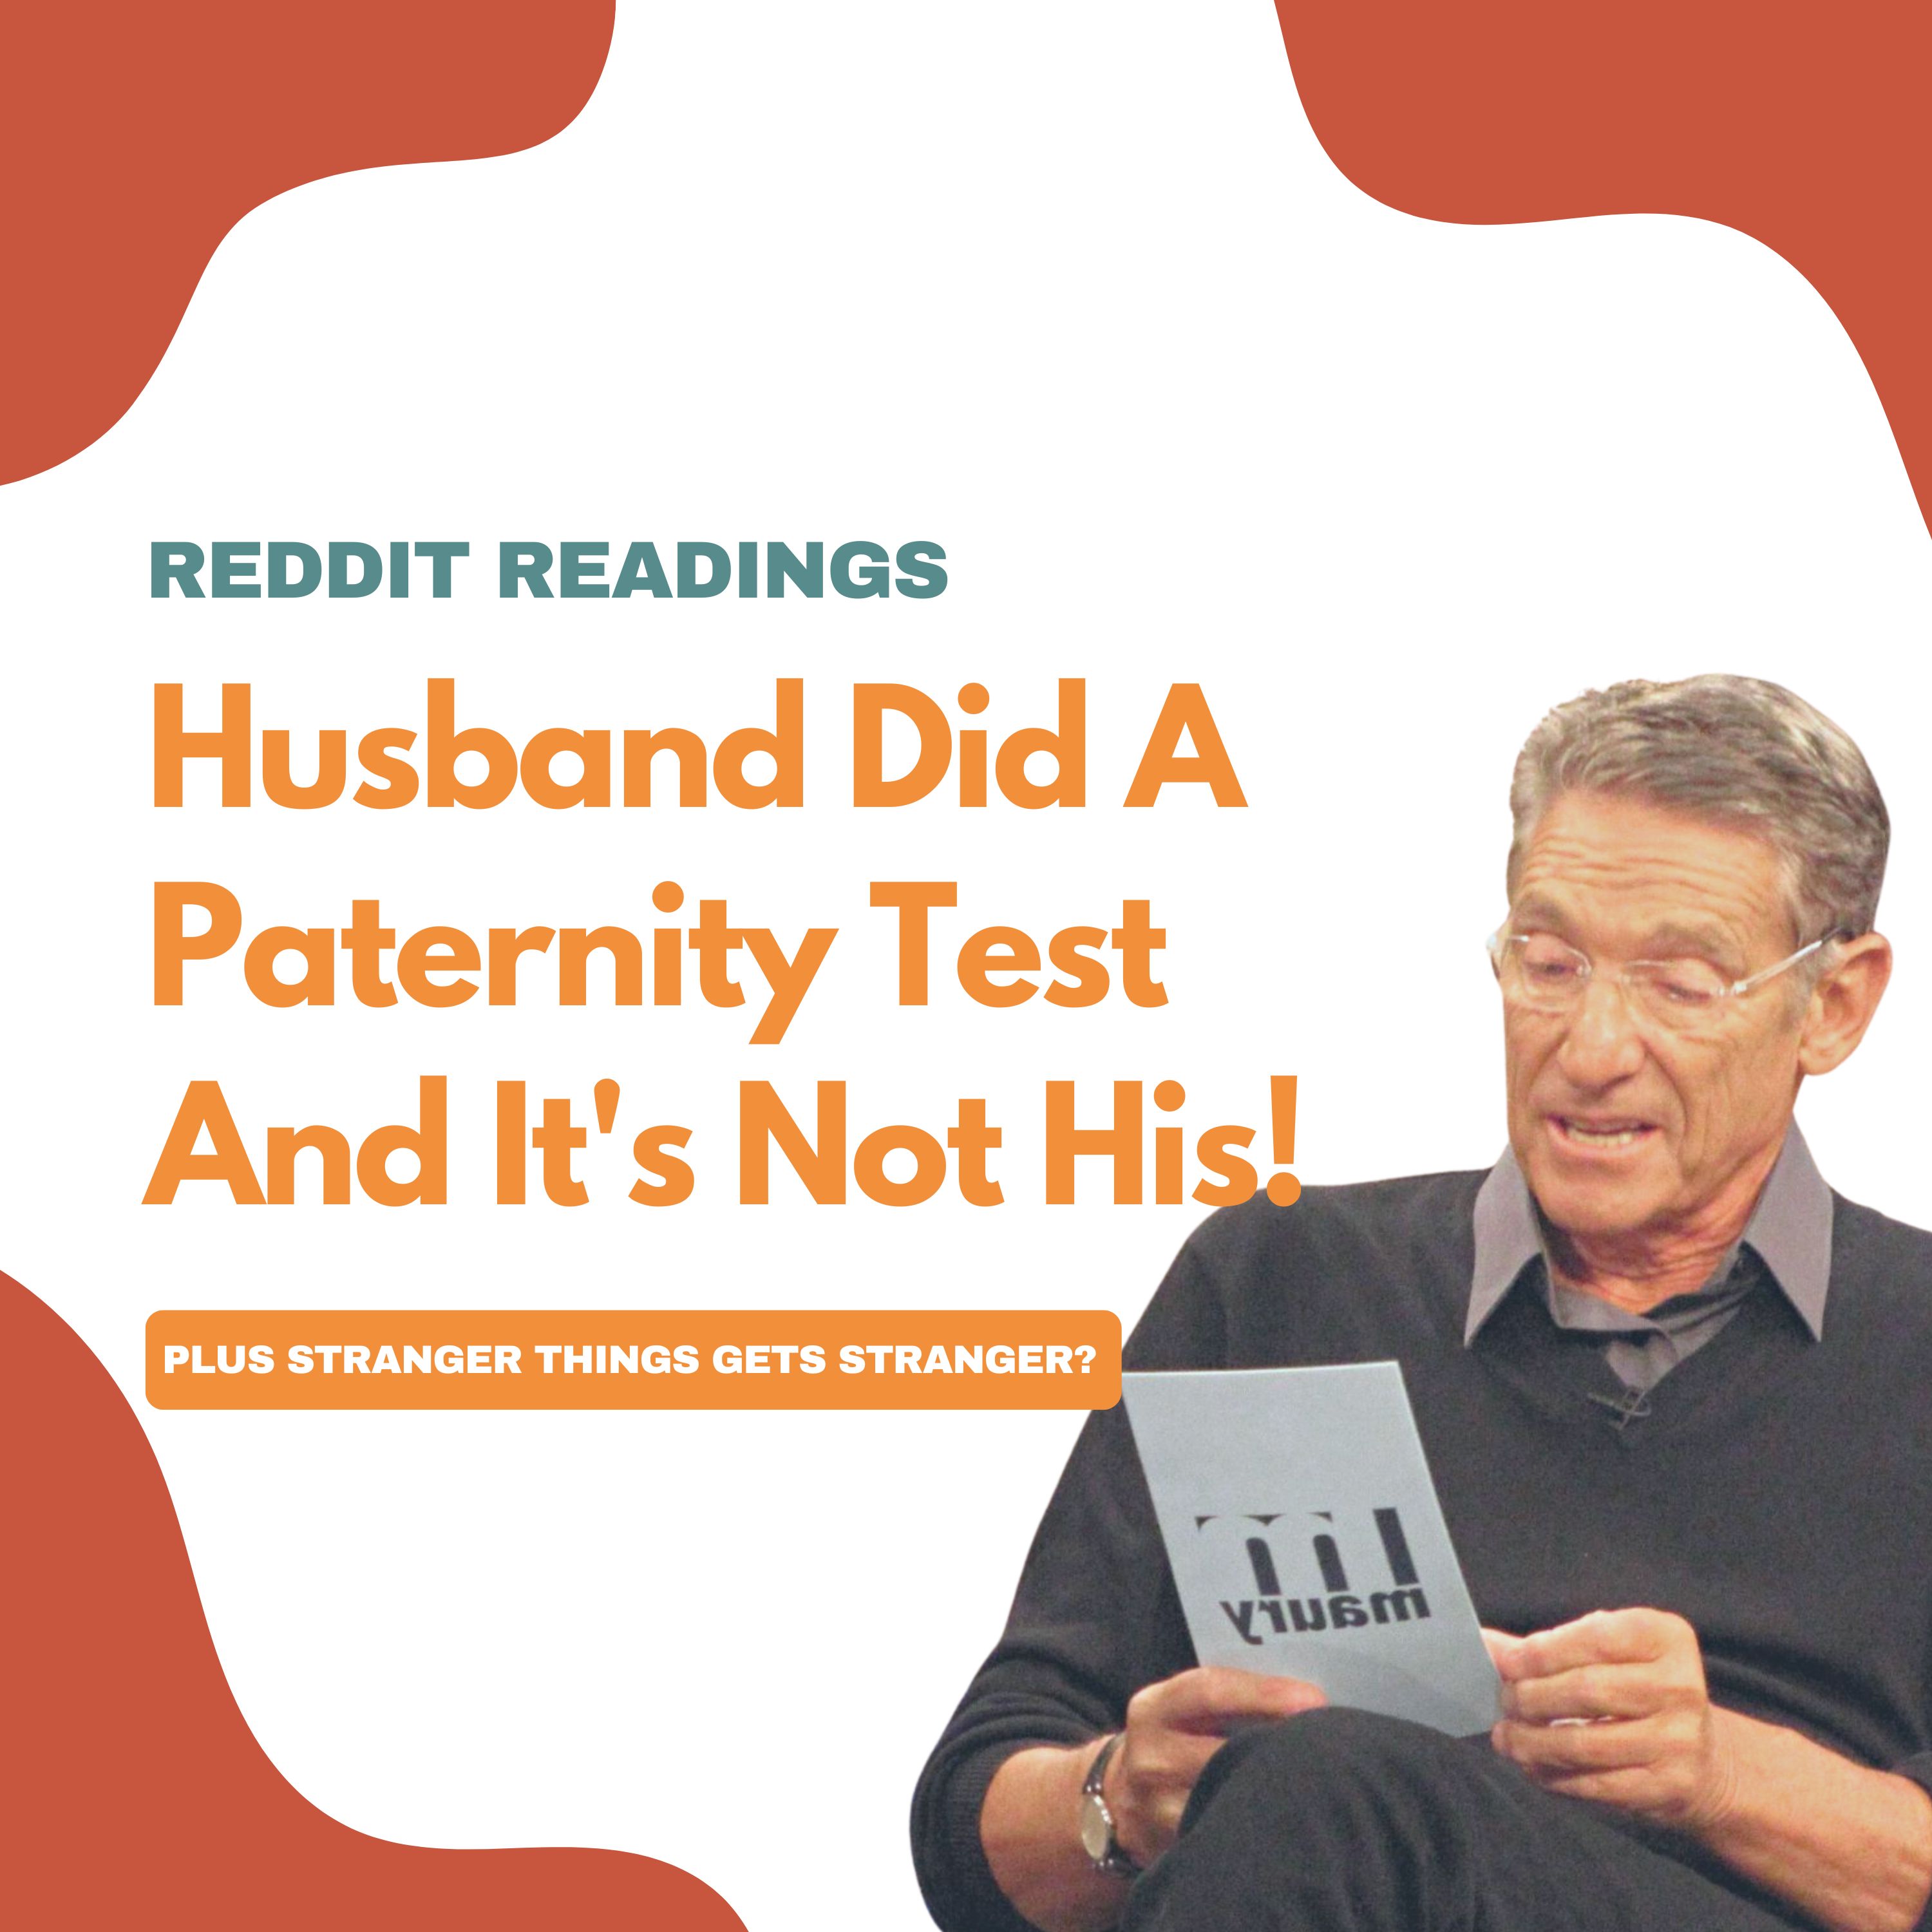 Reddit Readings | Husband Did A Paternity Test And It's Not His!